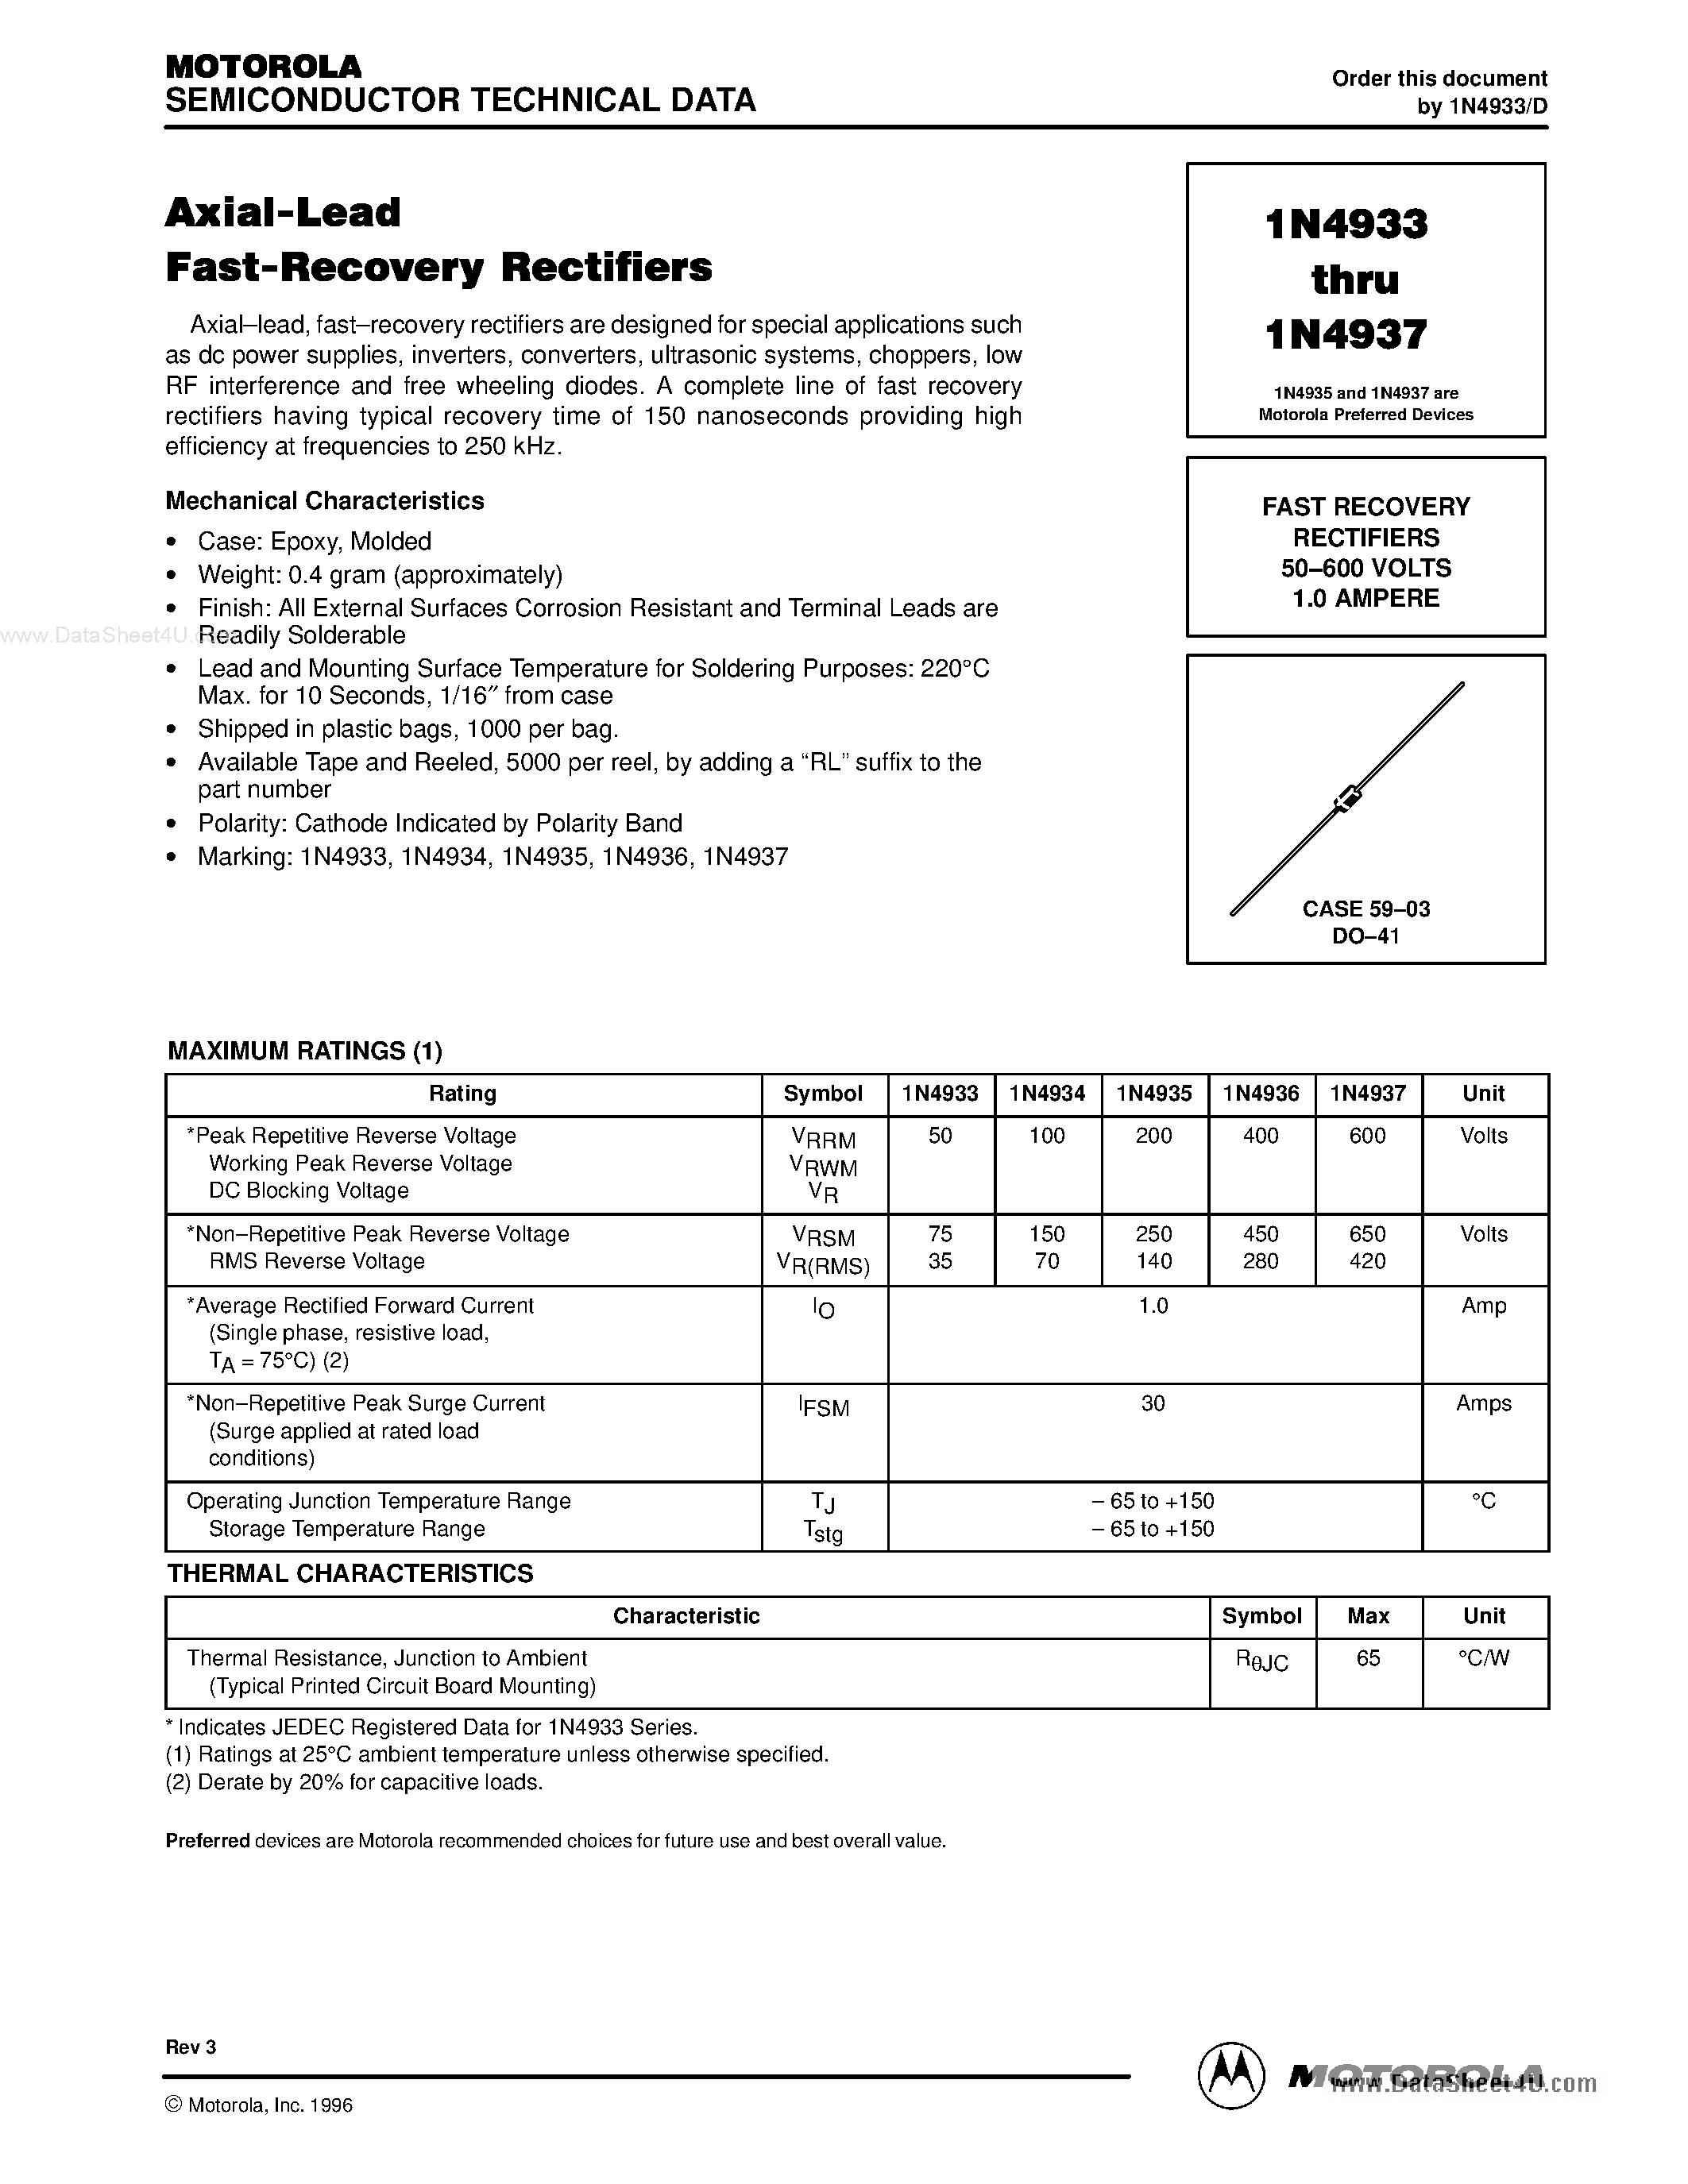 Datasheet IN4933 - (IN4933 - IN4937) FAST RECOVERY RECTIFIERS page 1